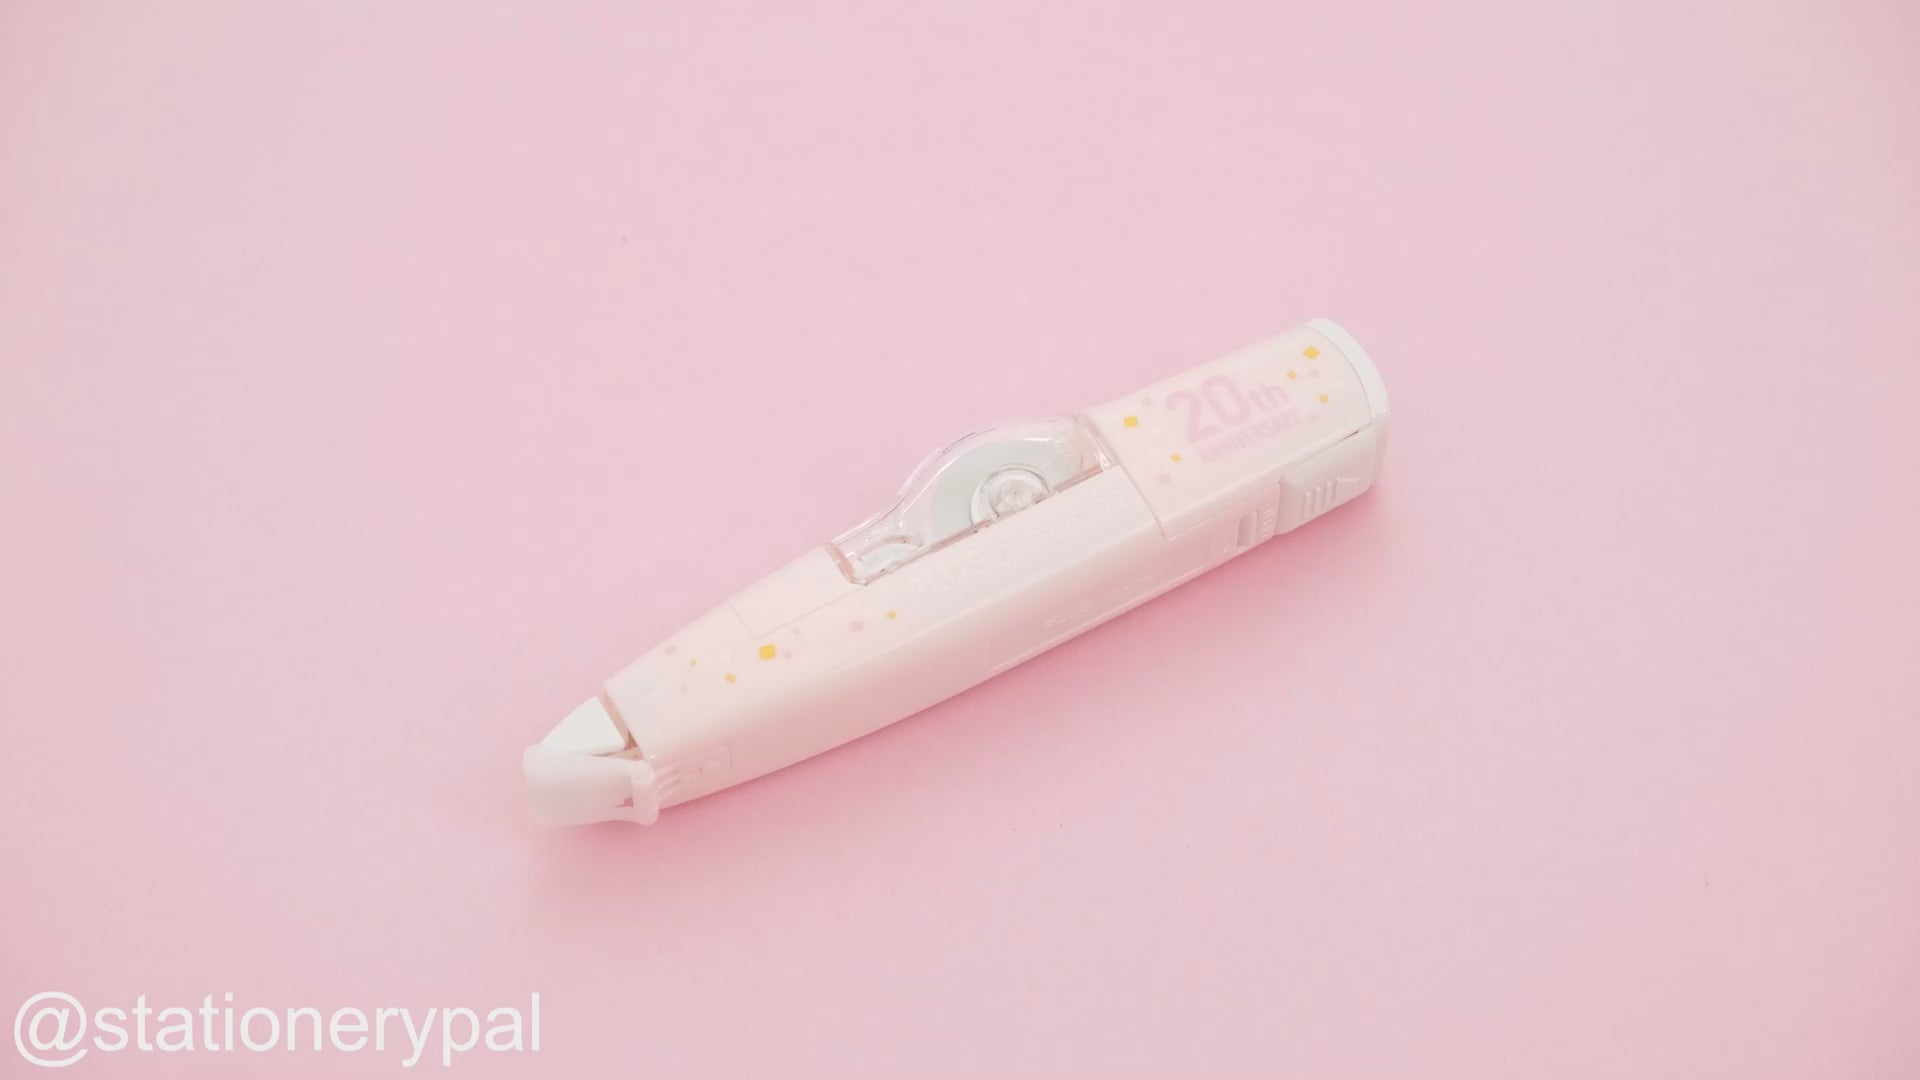 Plus Whiper Mr Correction Tape - 20th Anniversary Limited Edition - Pink